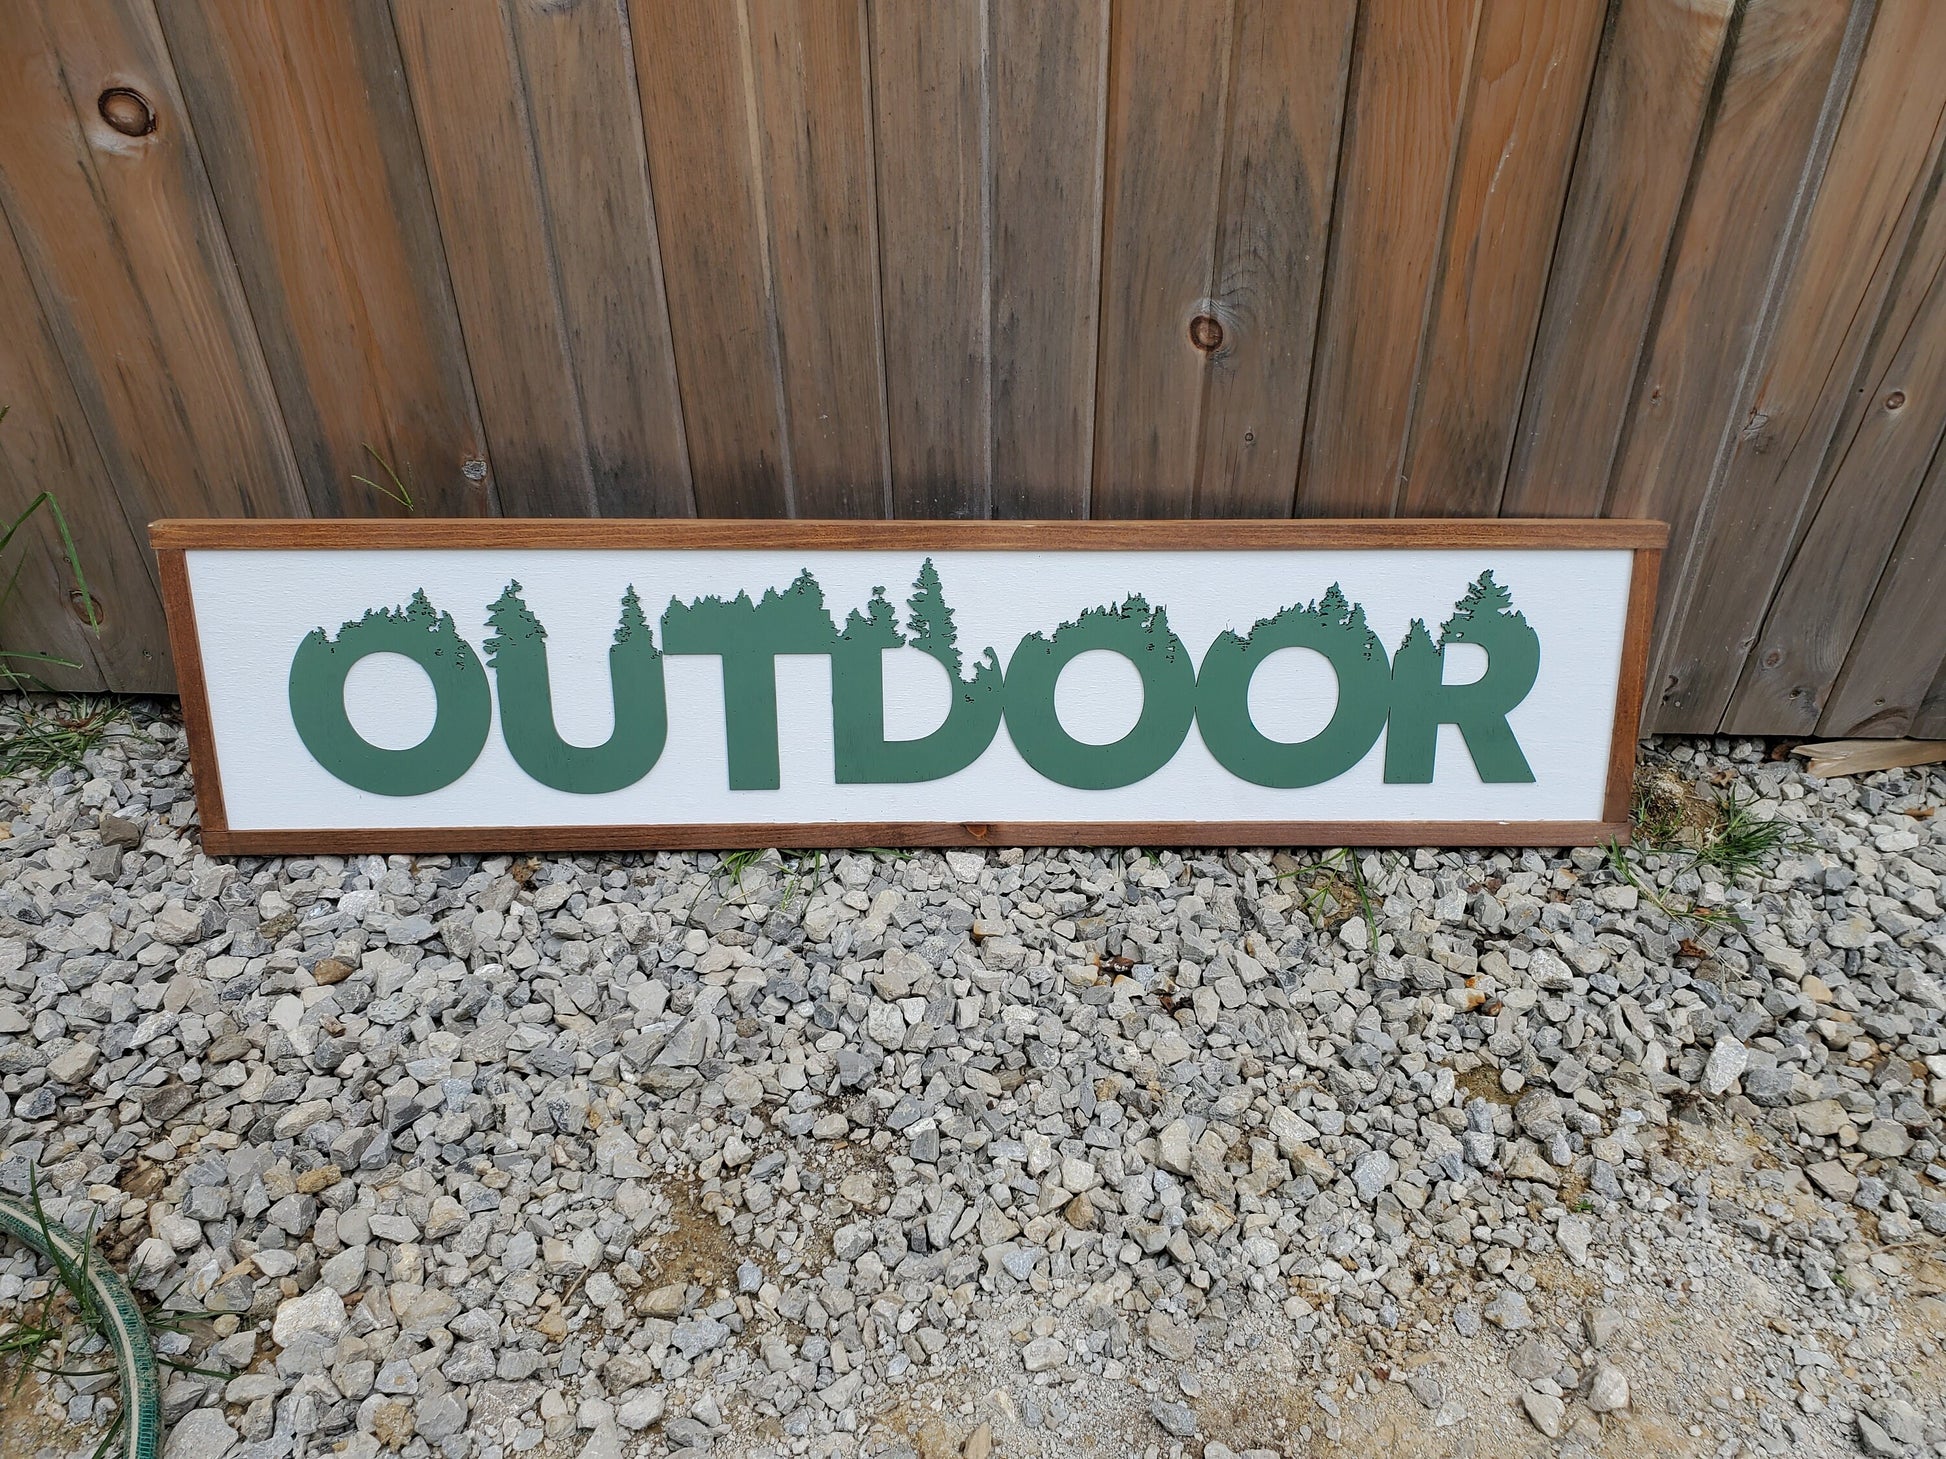 Outdoor, Adventure, Trees, Forest, Large Custom Ranch, Sign, Over-sized Rustic, Wood, Laser Cut Out, 3D, Extra Large